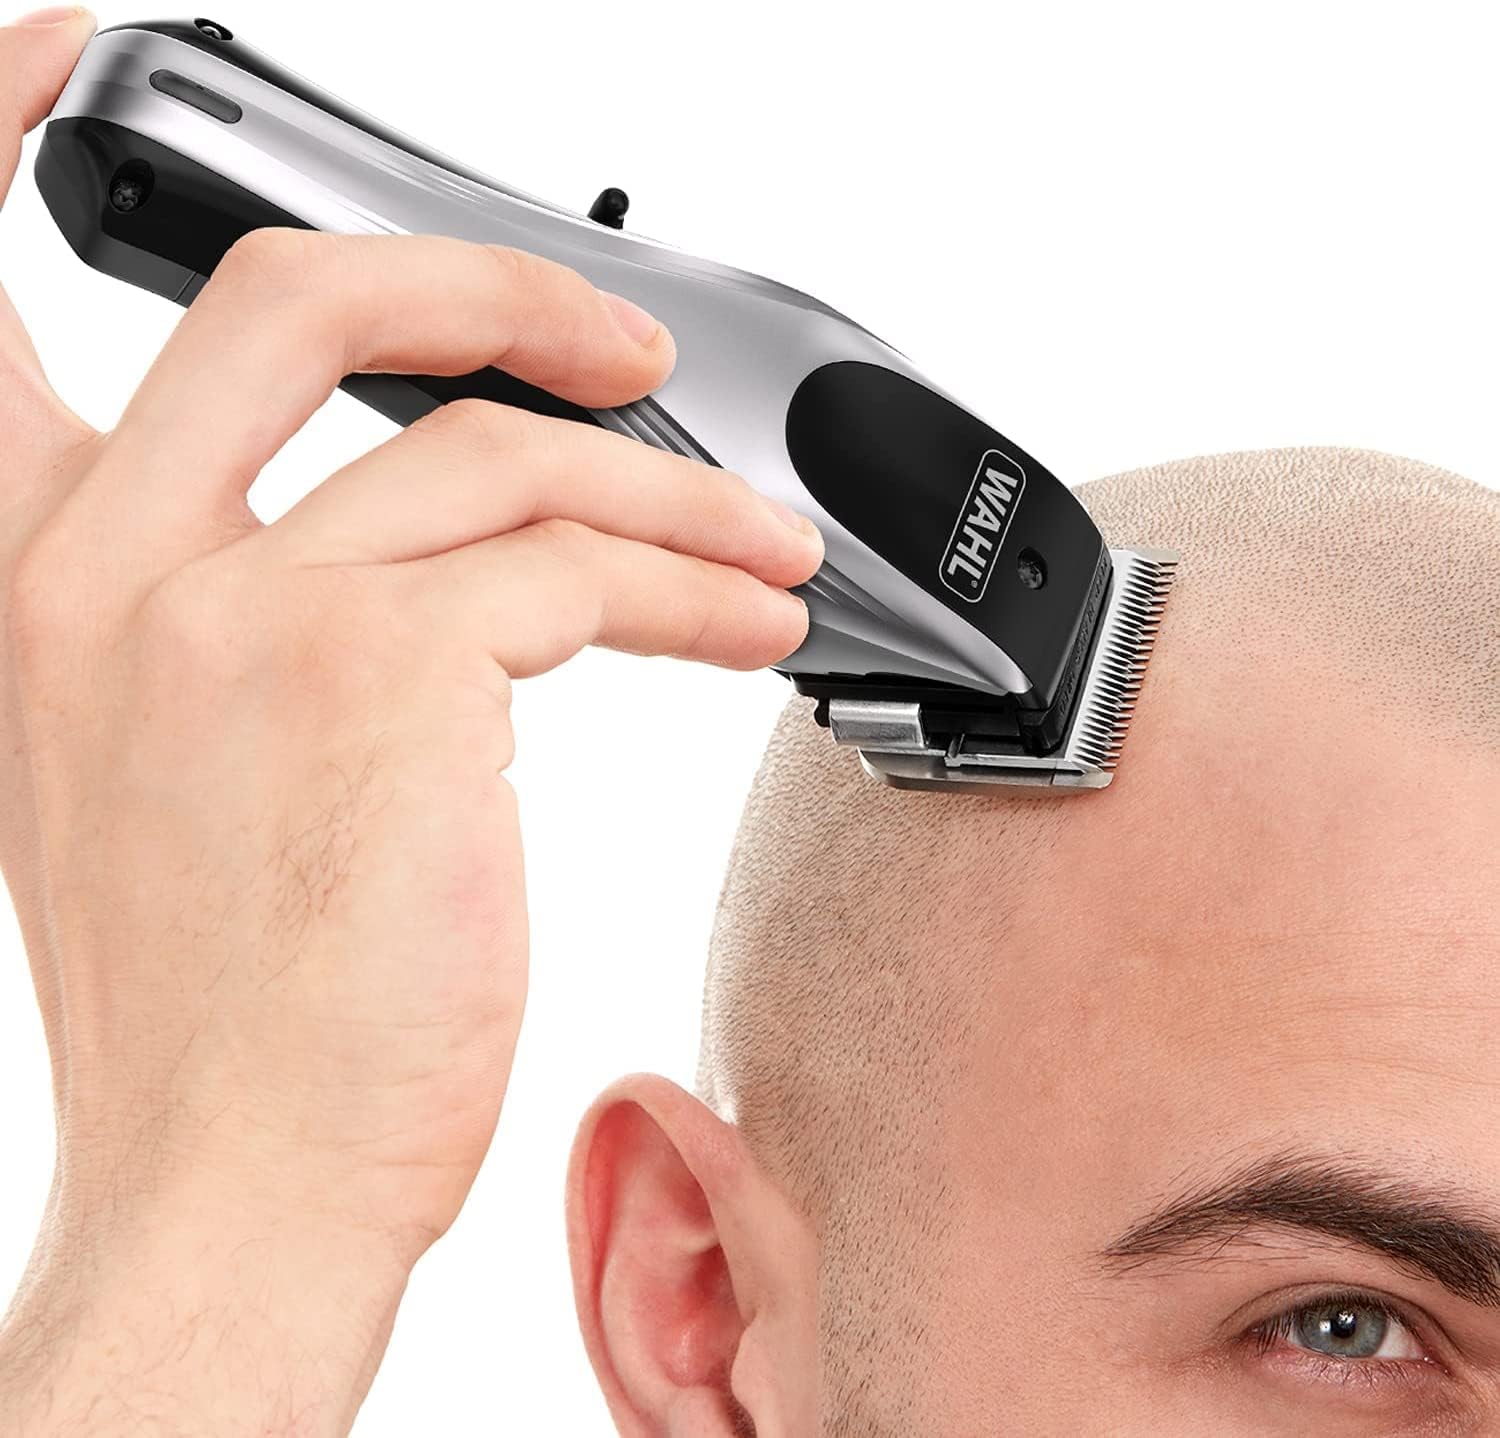 WAHL Lithium Ion Multi cut Pro Hair Clipper | Rechargeable hair clipper with Powerful Motor, cordless hair clipper for close hair cutting & head shaves | 120 minutes of run time with 2-hour charge.